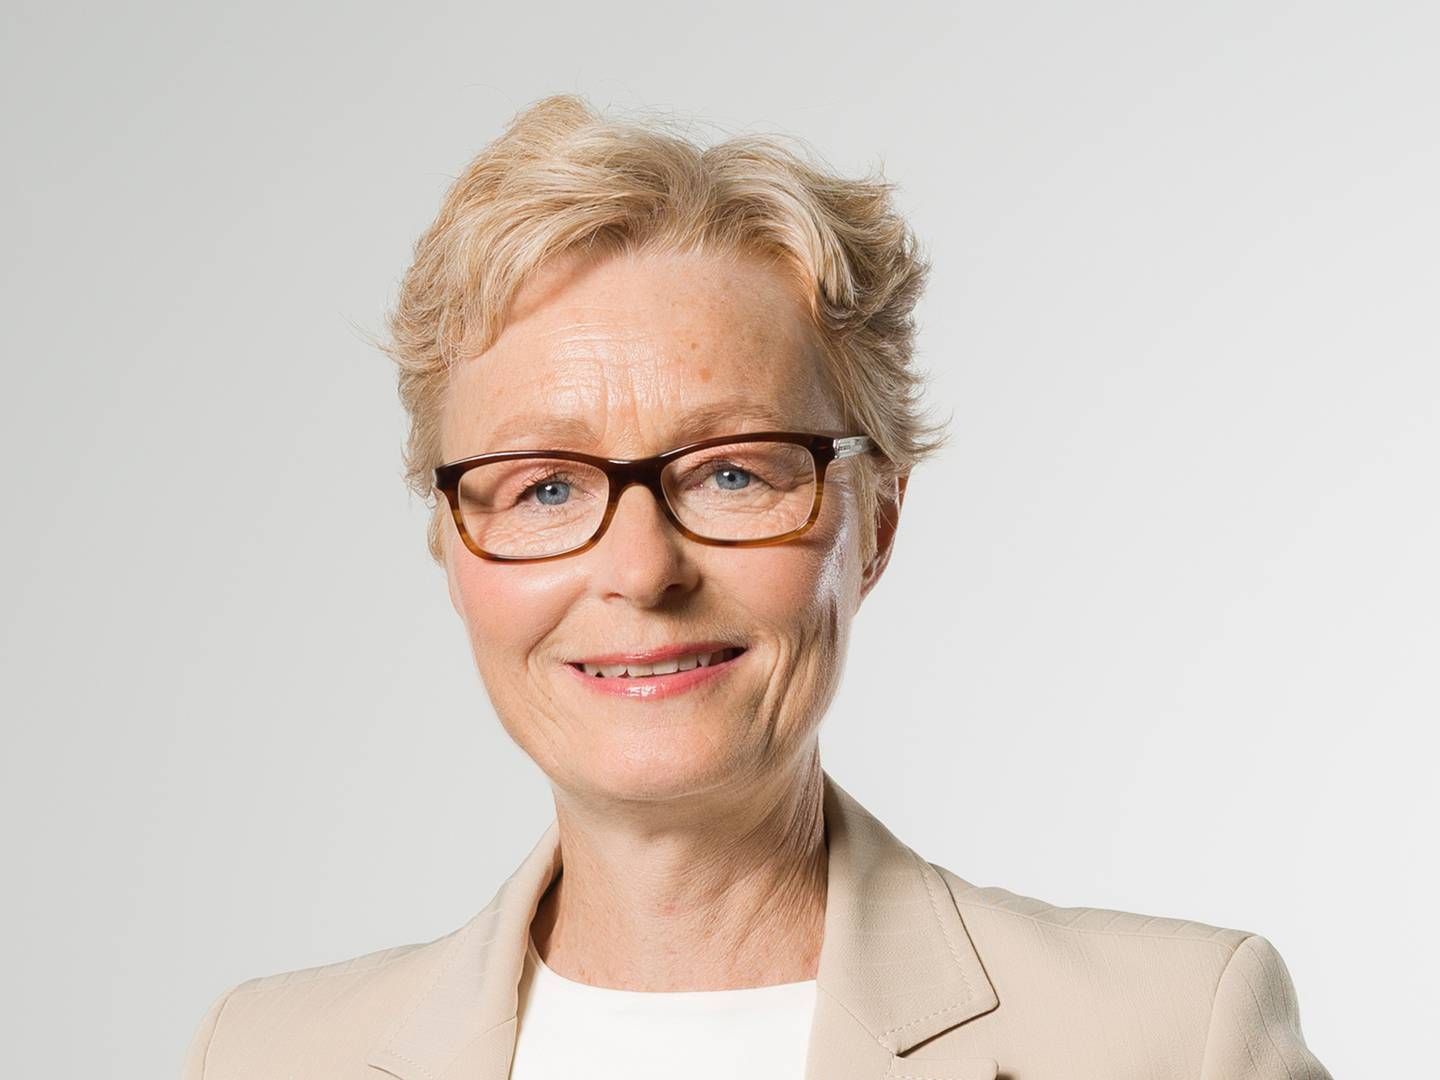 According to Inger Söderbom, cost efficiency is of great importance to the Swedish Pensions Agency. | Foto: Pensionsmyndigheten/pr